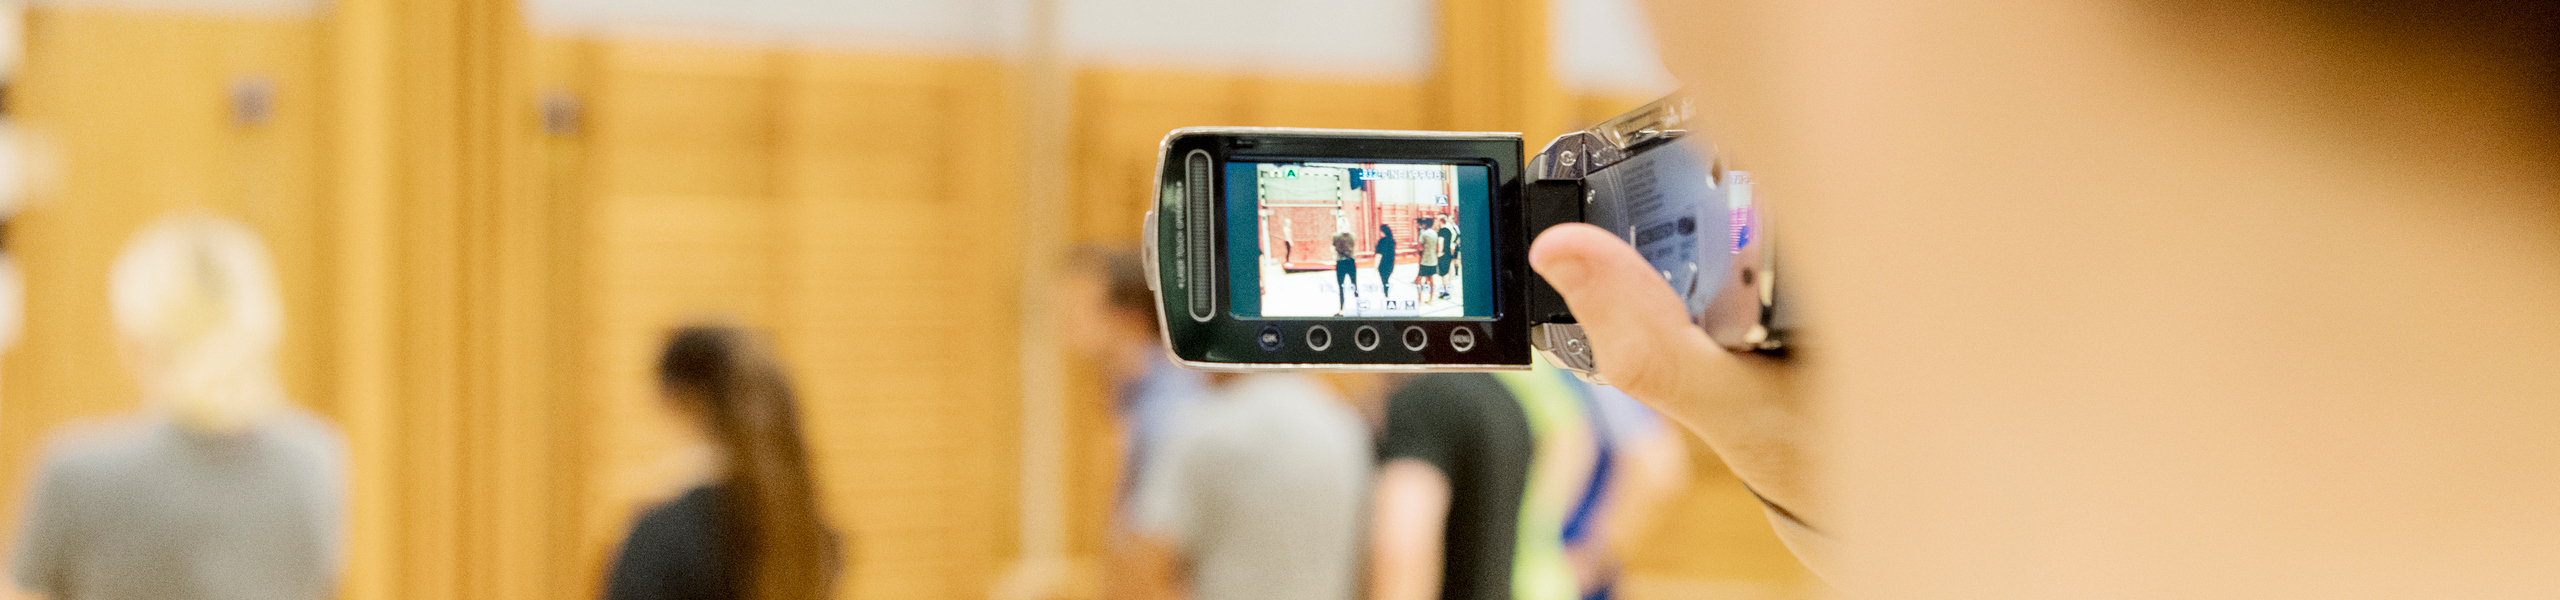 student films in sports hall